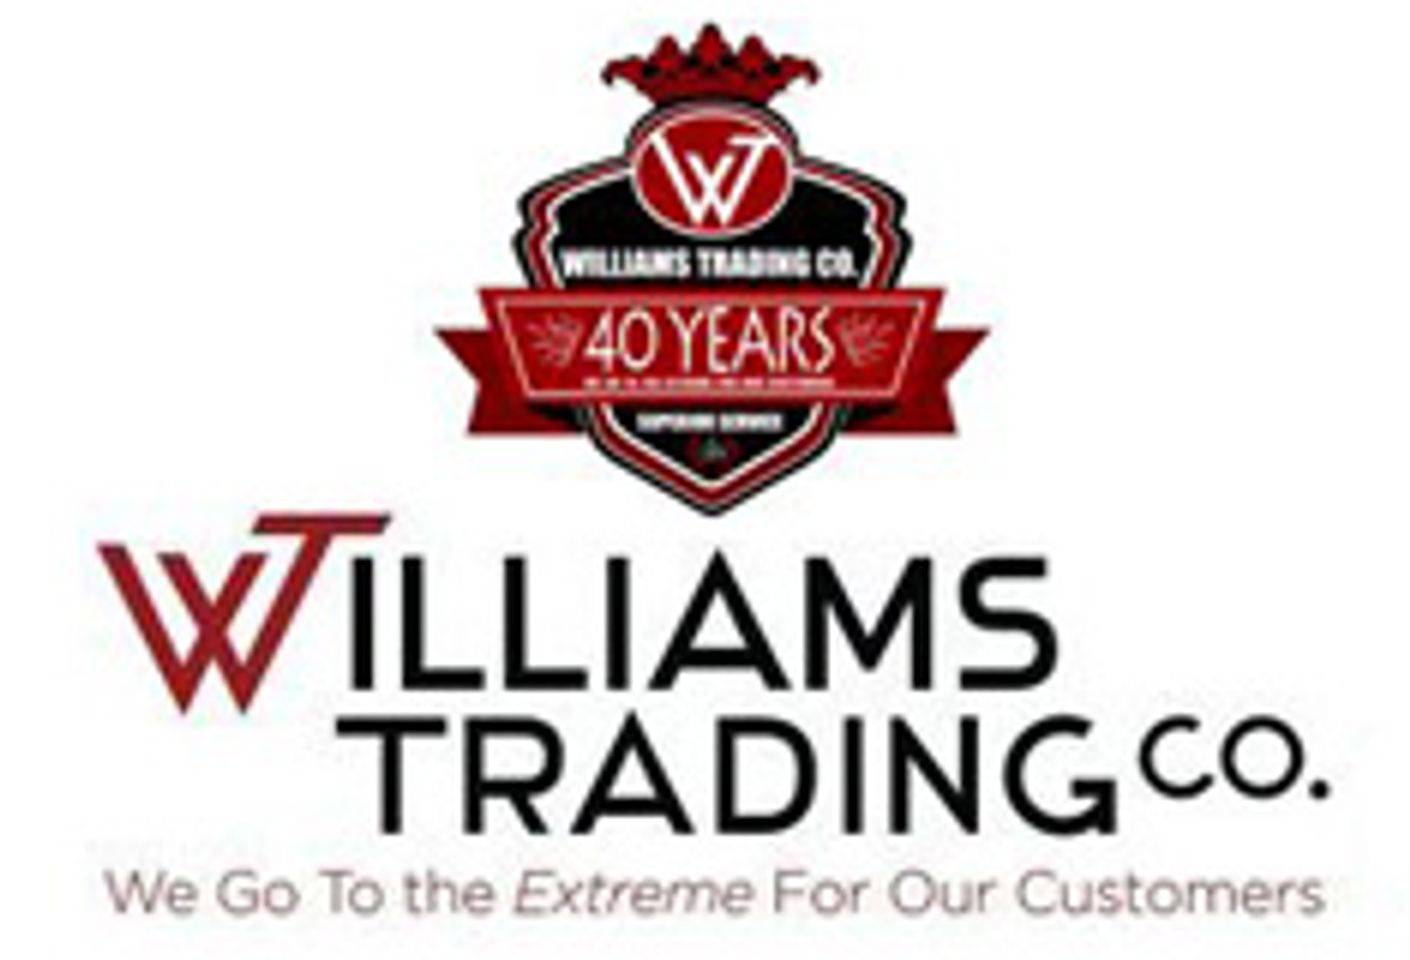 Williams Trading Adds Manbound by Sportsheets Course To WTU